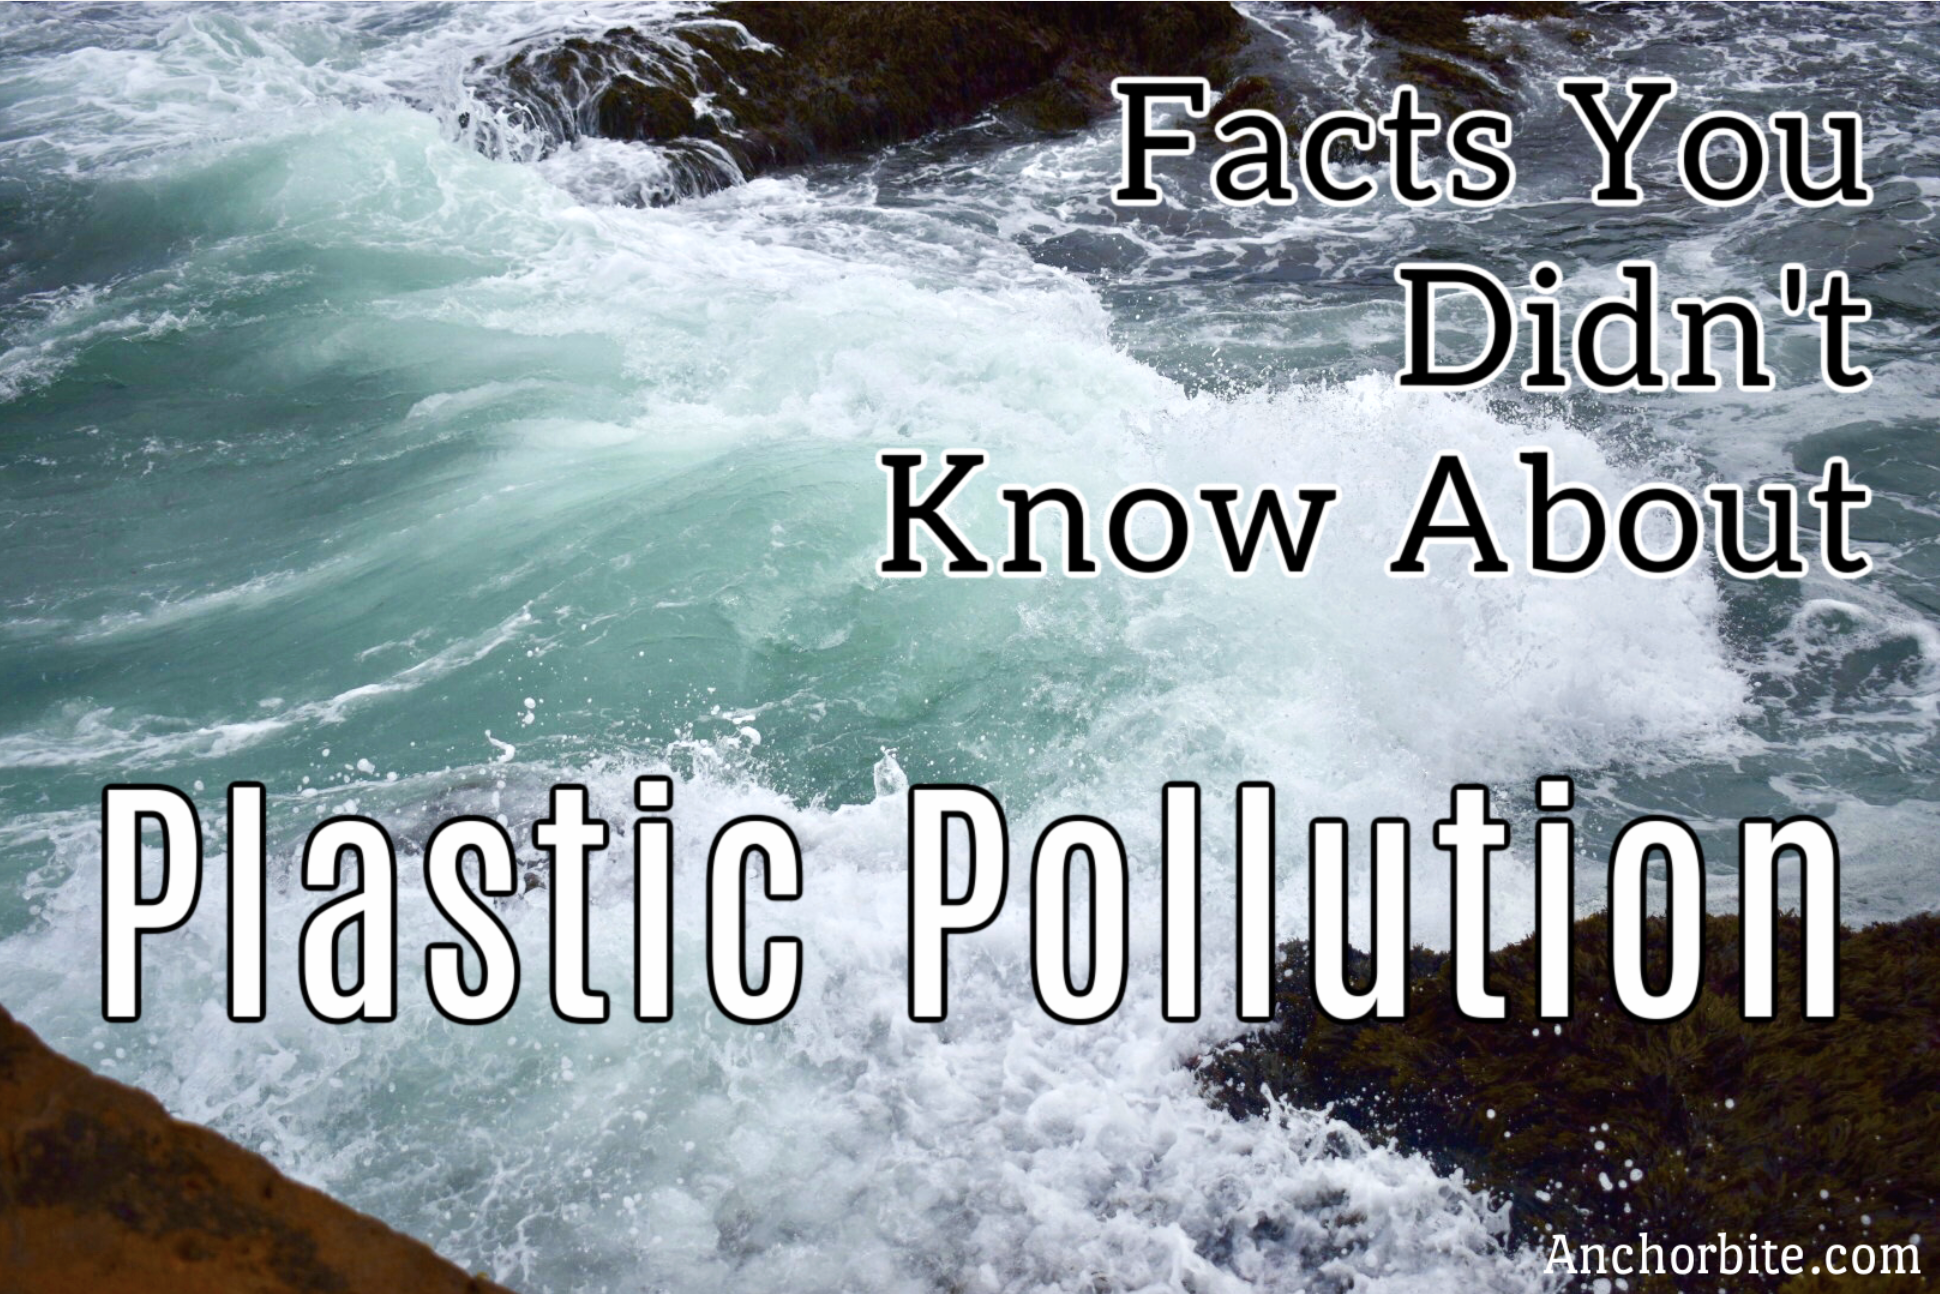 Facts you didn’t know about Plastic Pollution